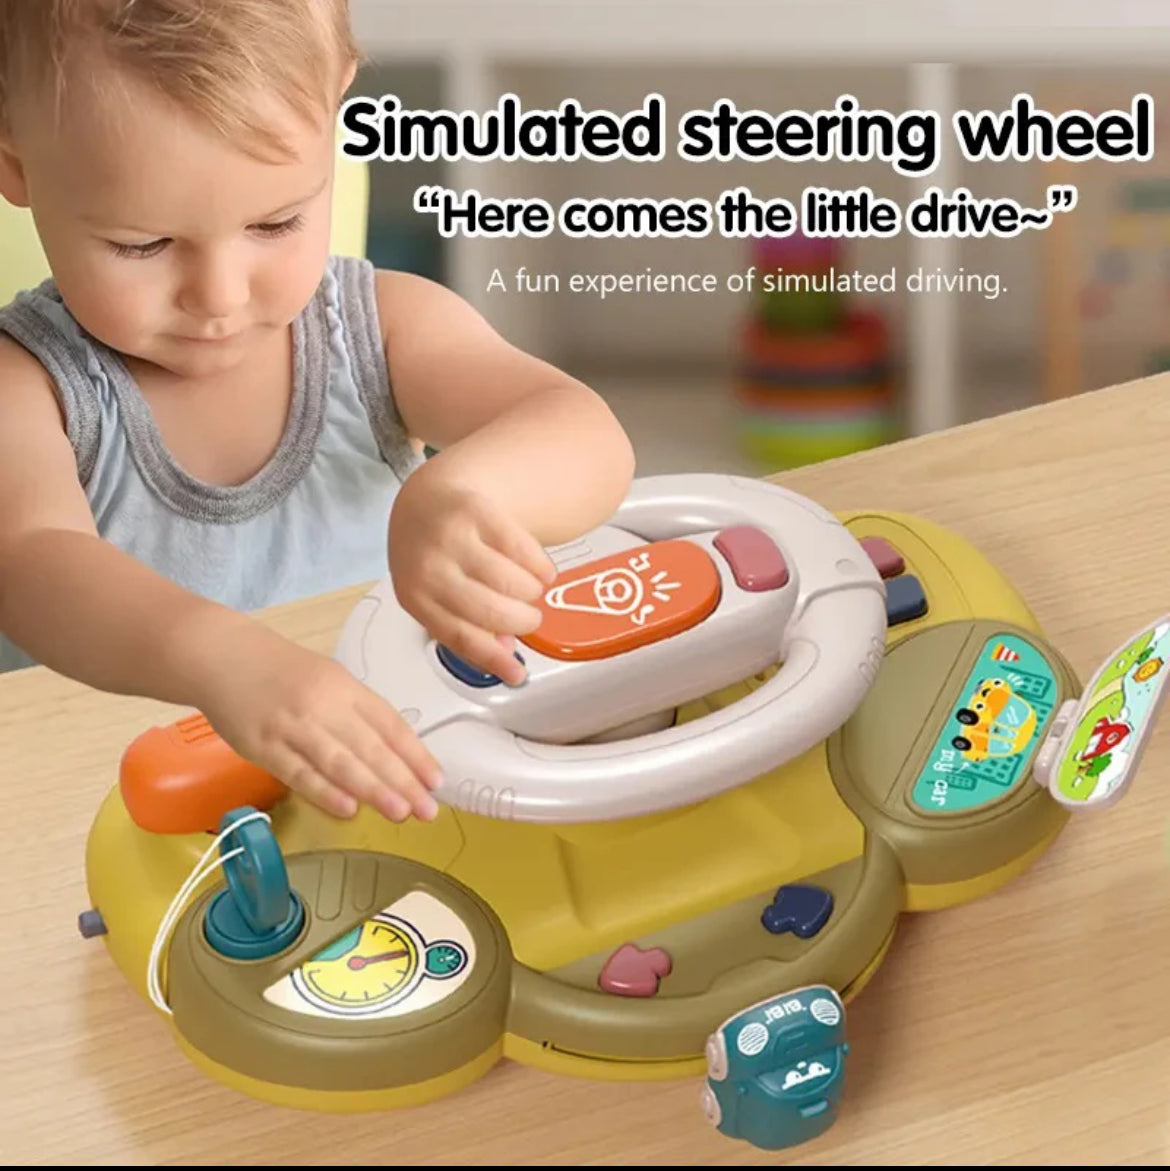 Simulated steering wheel for your kiddos - Kidspark